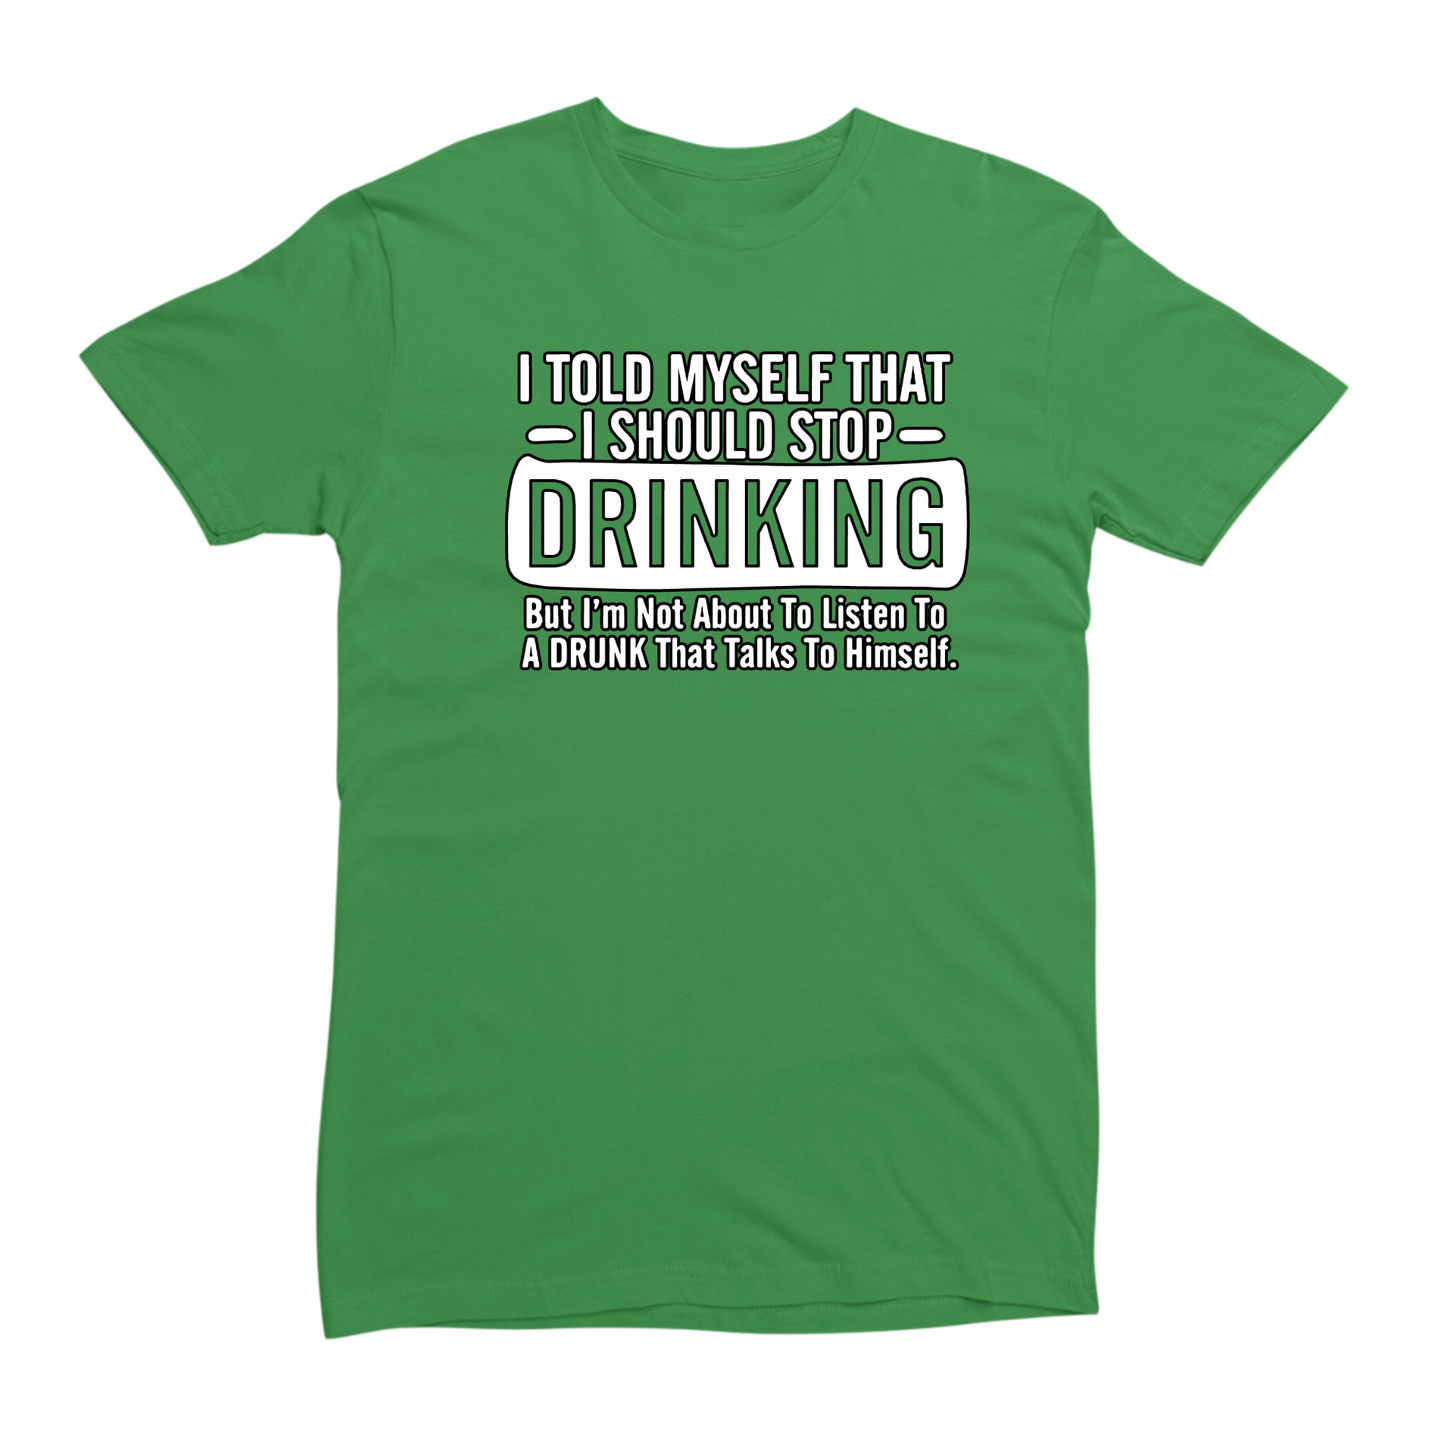 I Should Stop Drinking T-shirt